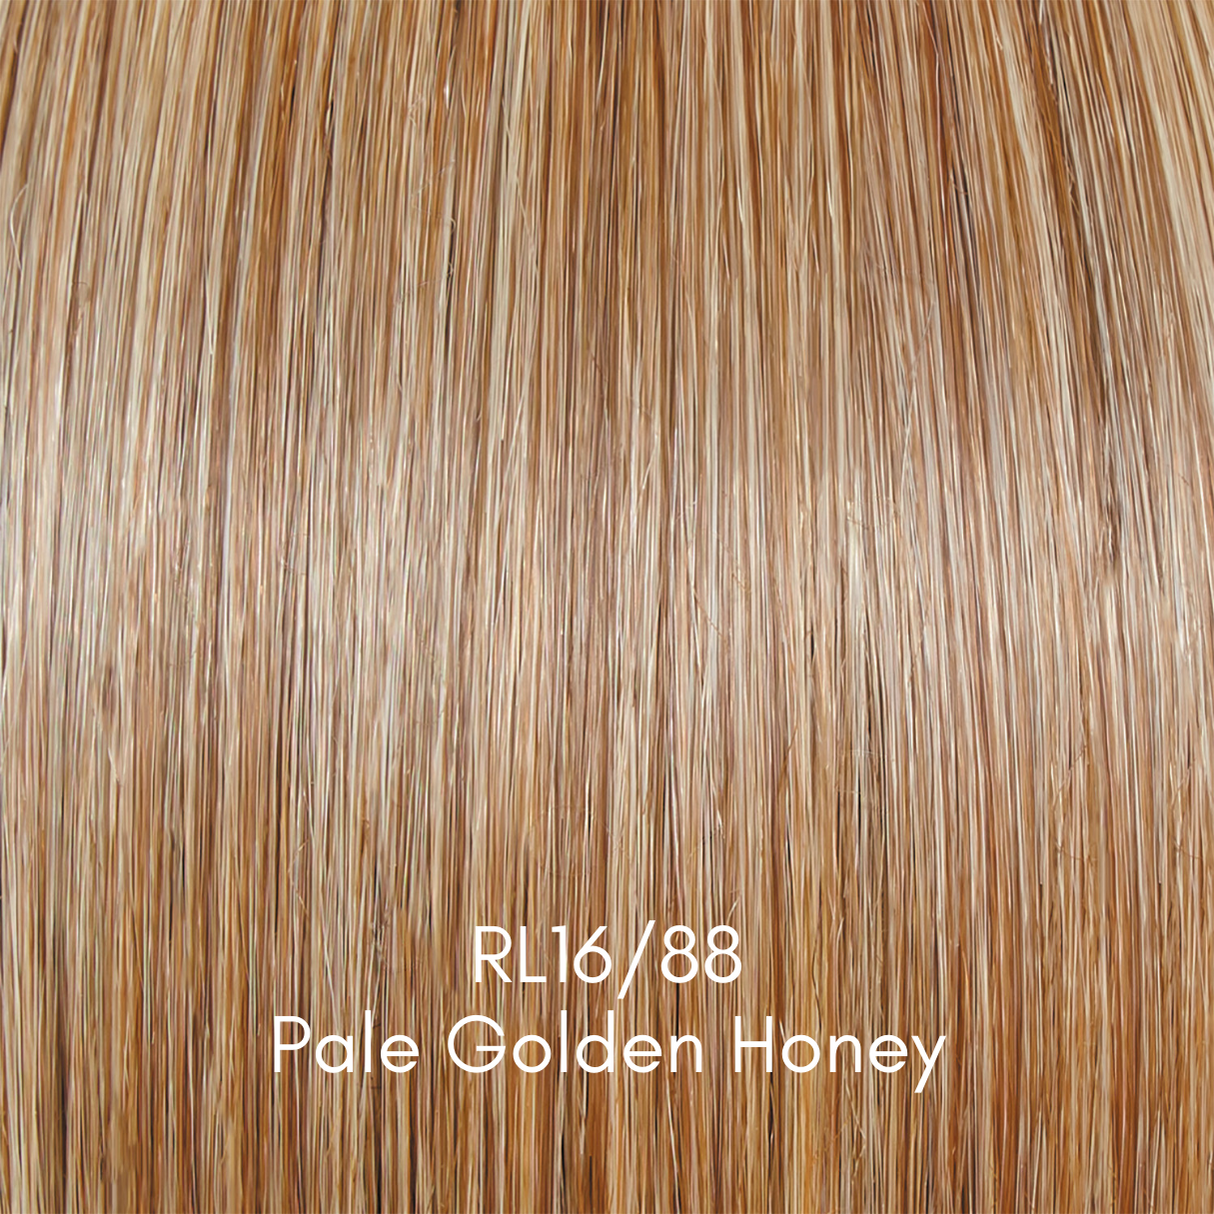 Day to Date - Signature Wig Collection by Raquel Welch